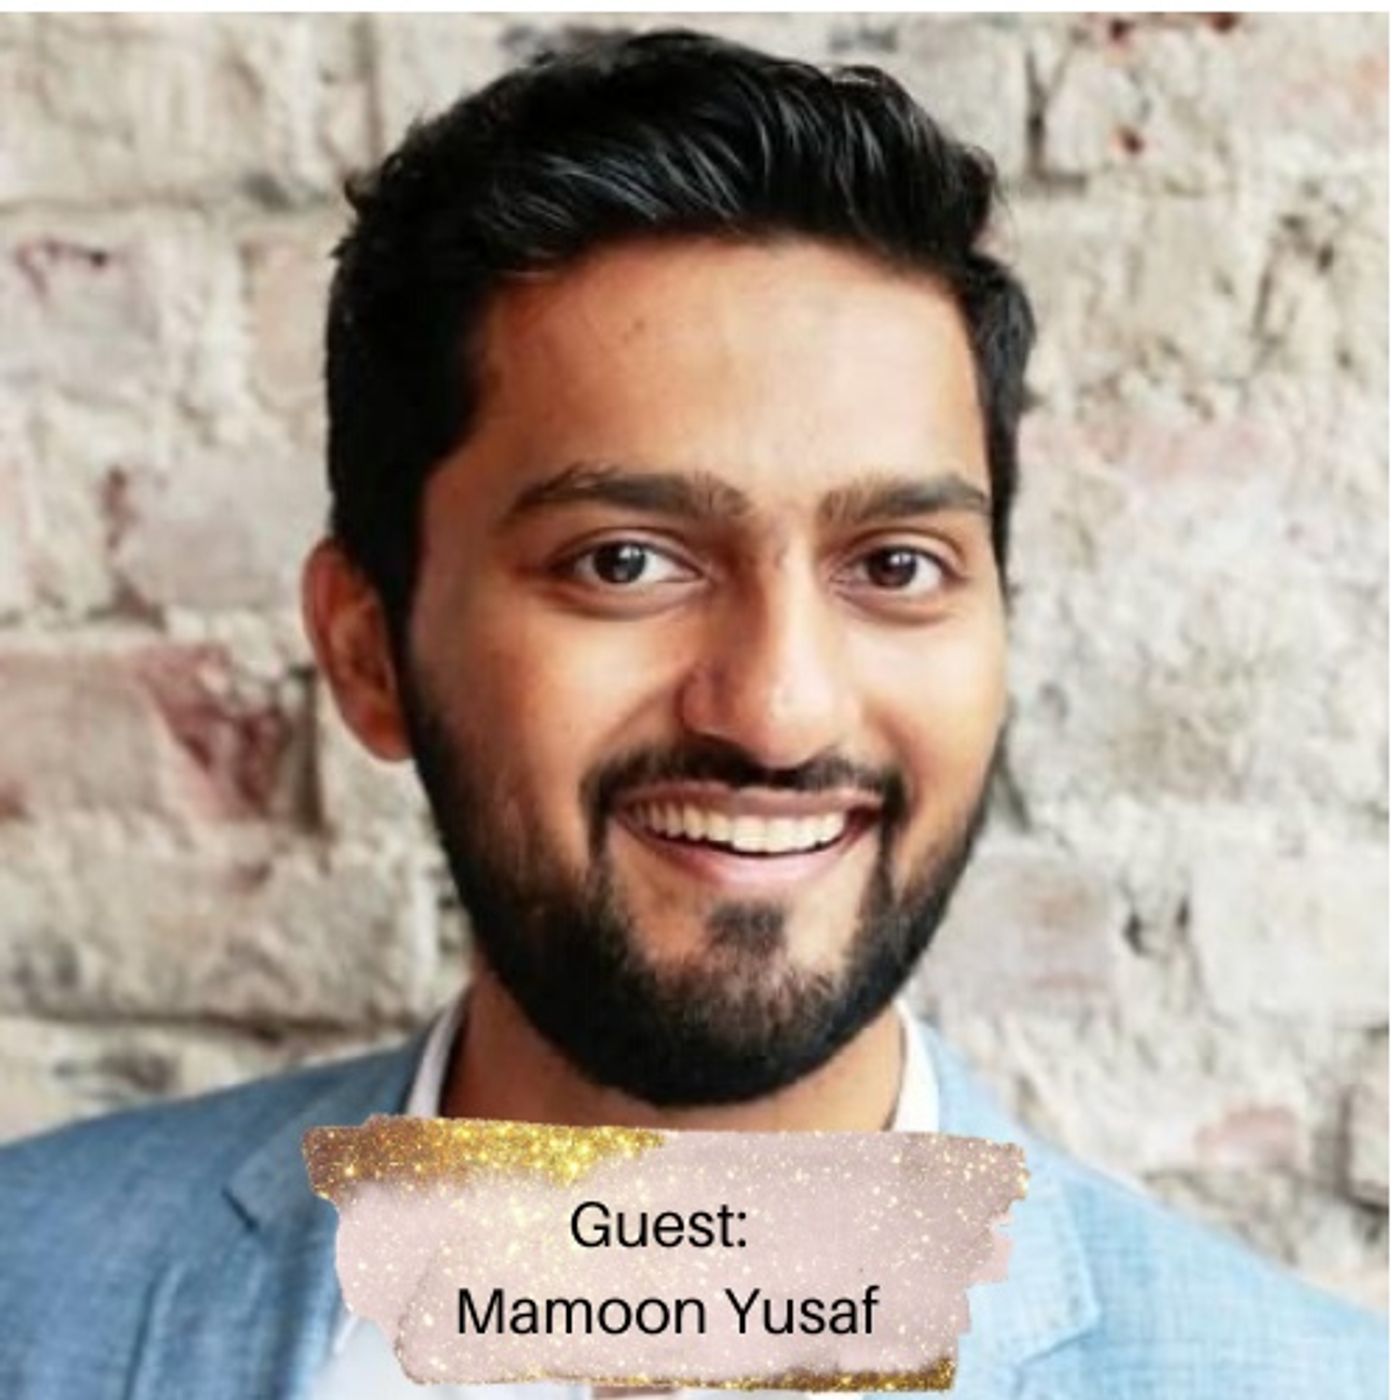 Episode 7 - Mamoon Yusaf on becoming master of your thoughts and feelings